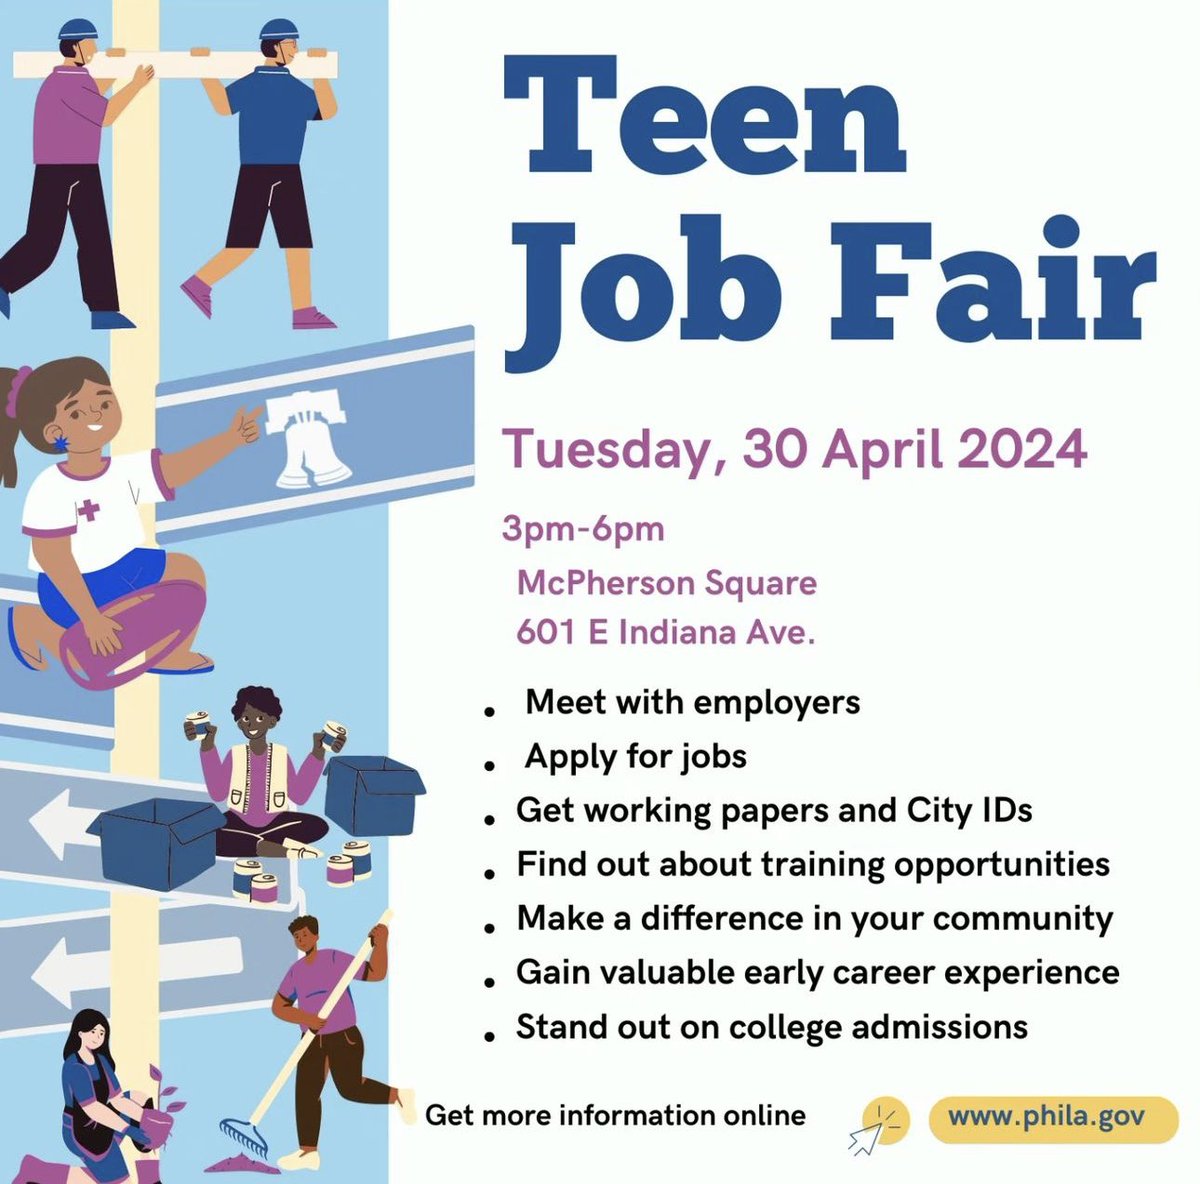 If you know a young person looking for employment make sure you tell them about the upcoming Teen Job Fair this Tuesday, April 30th!